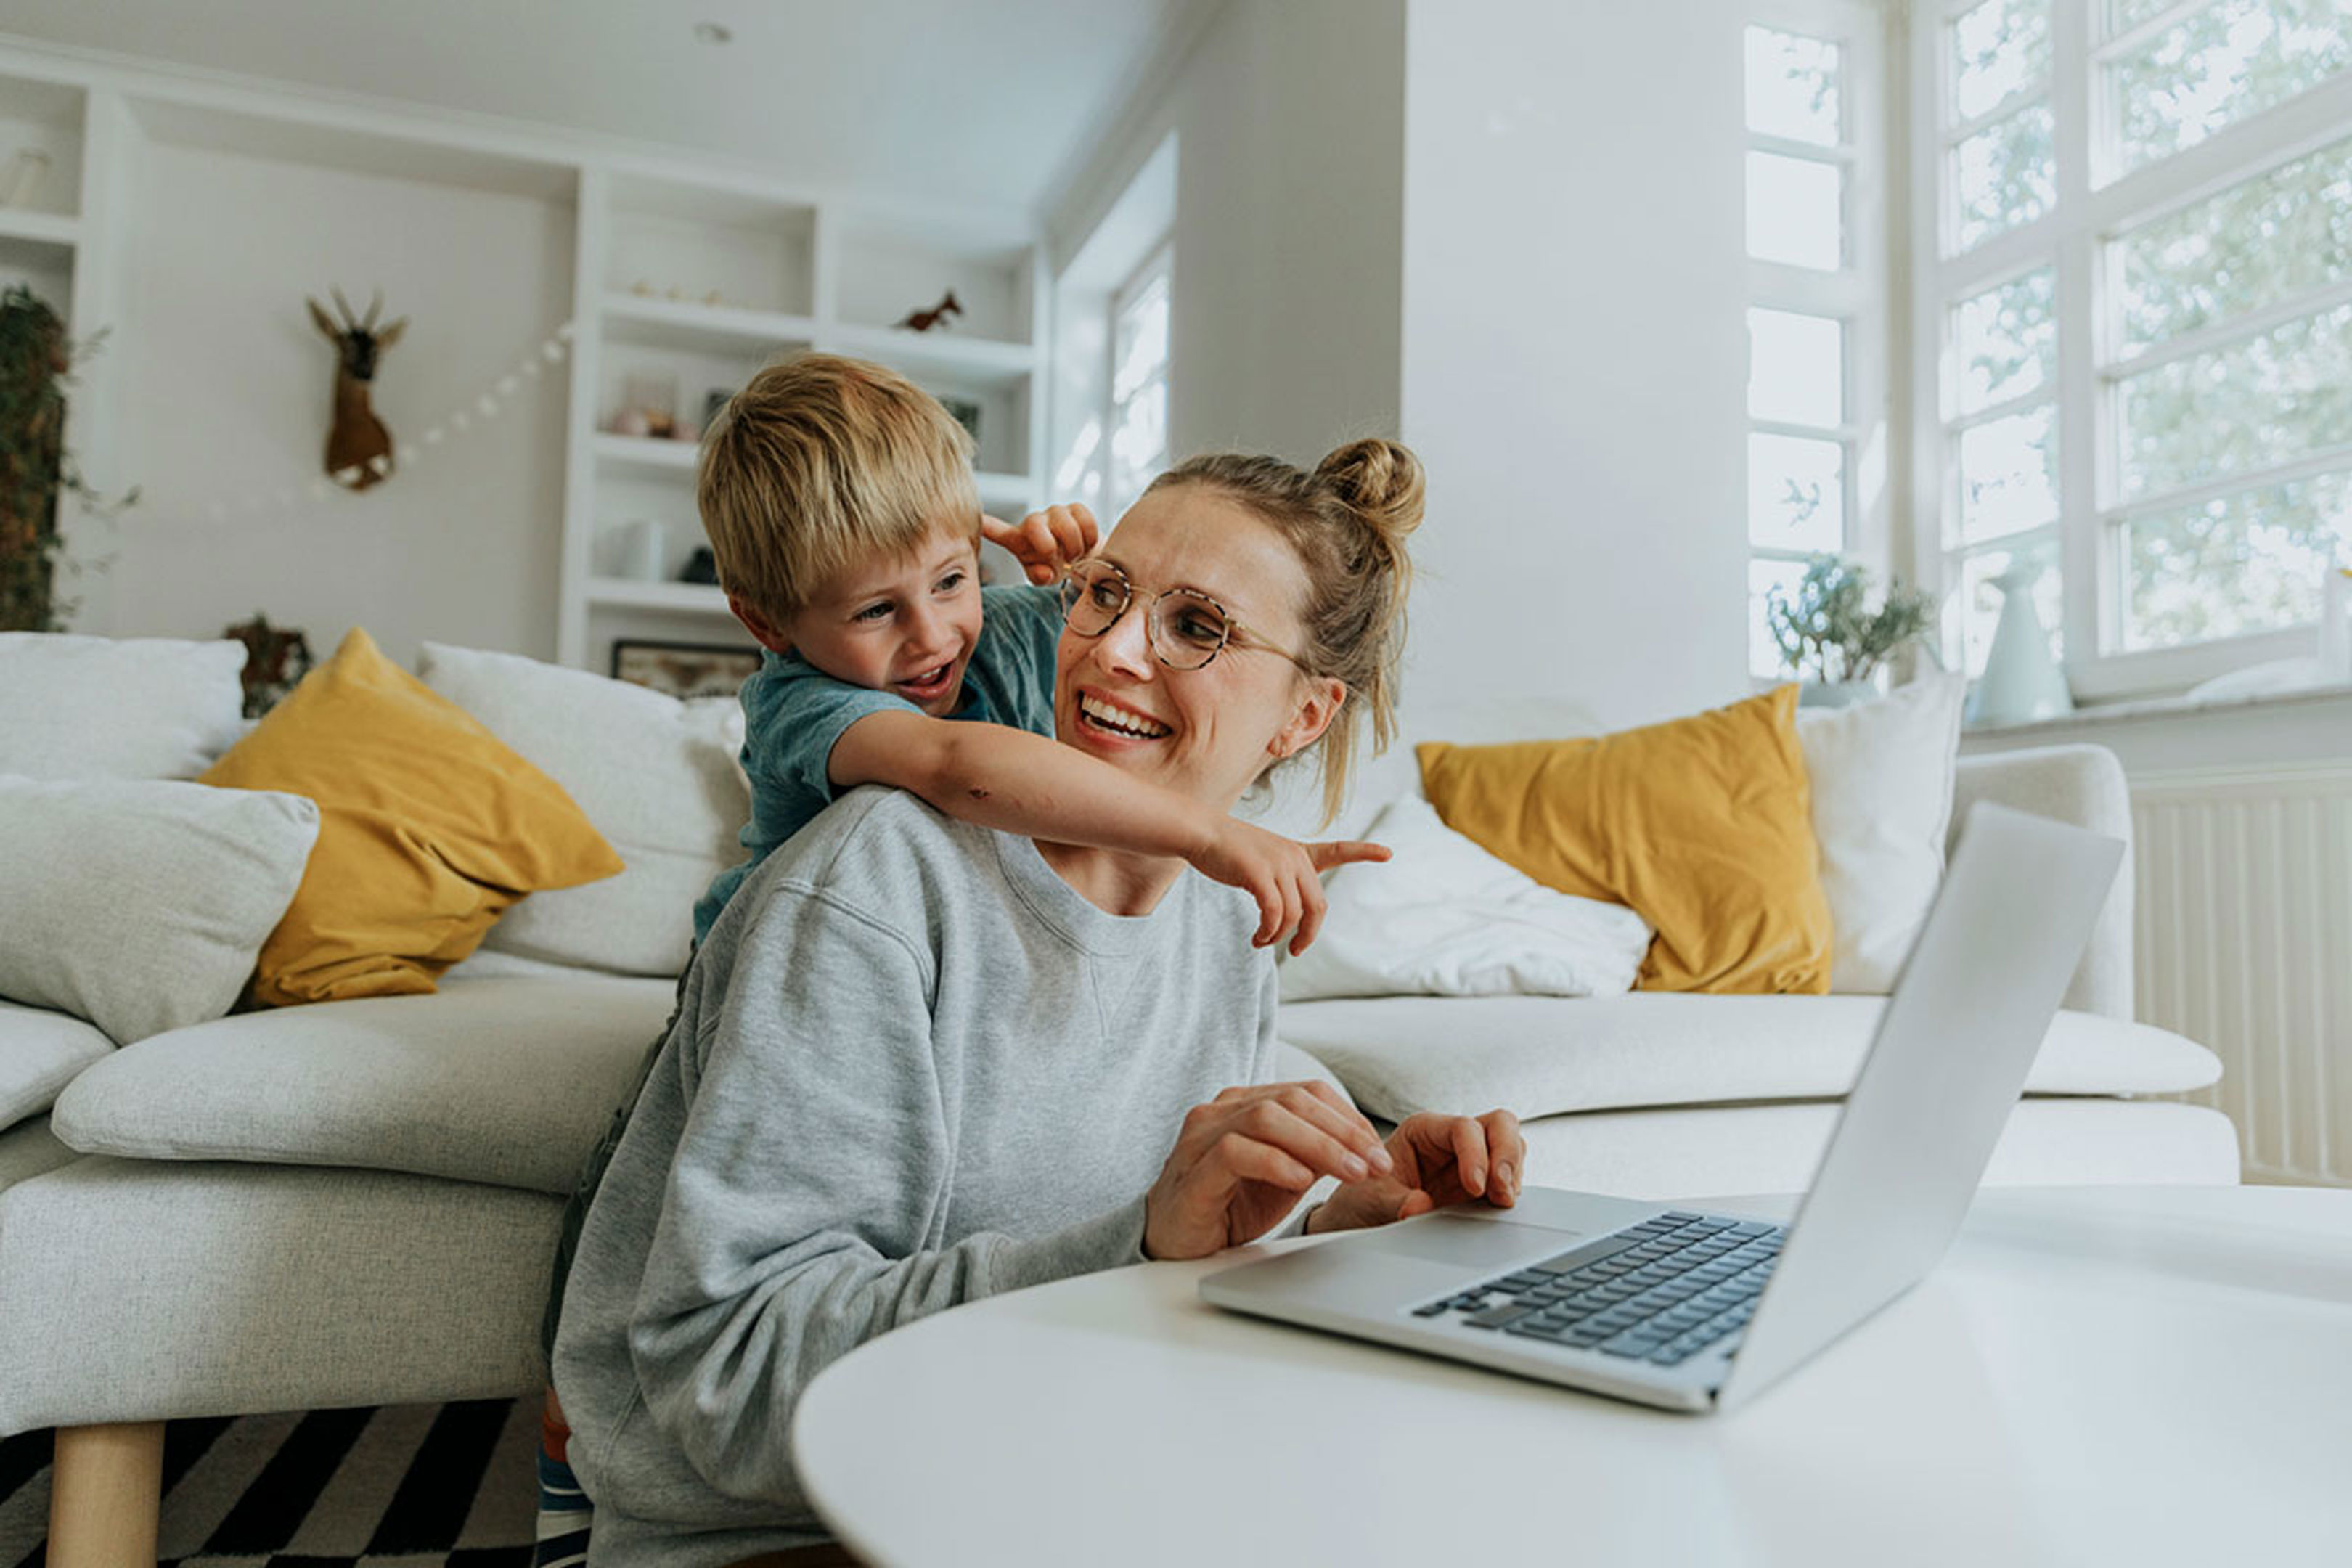 Mum With Blonde Haired Son Pointing At Laptop